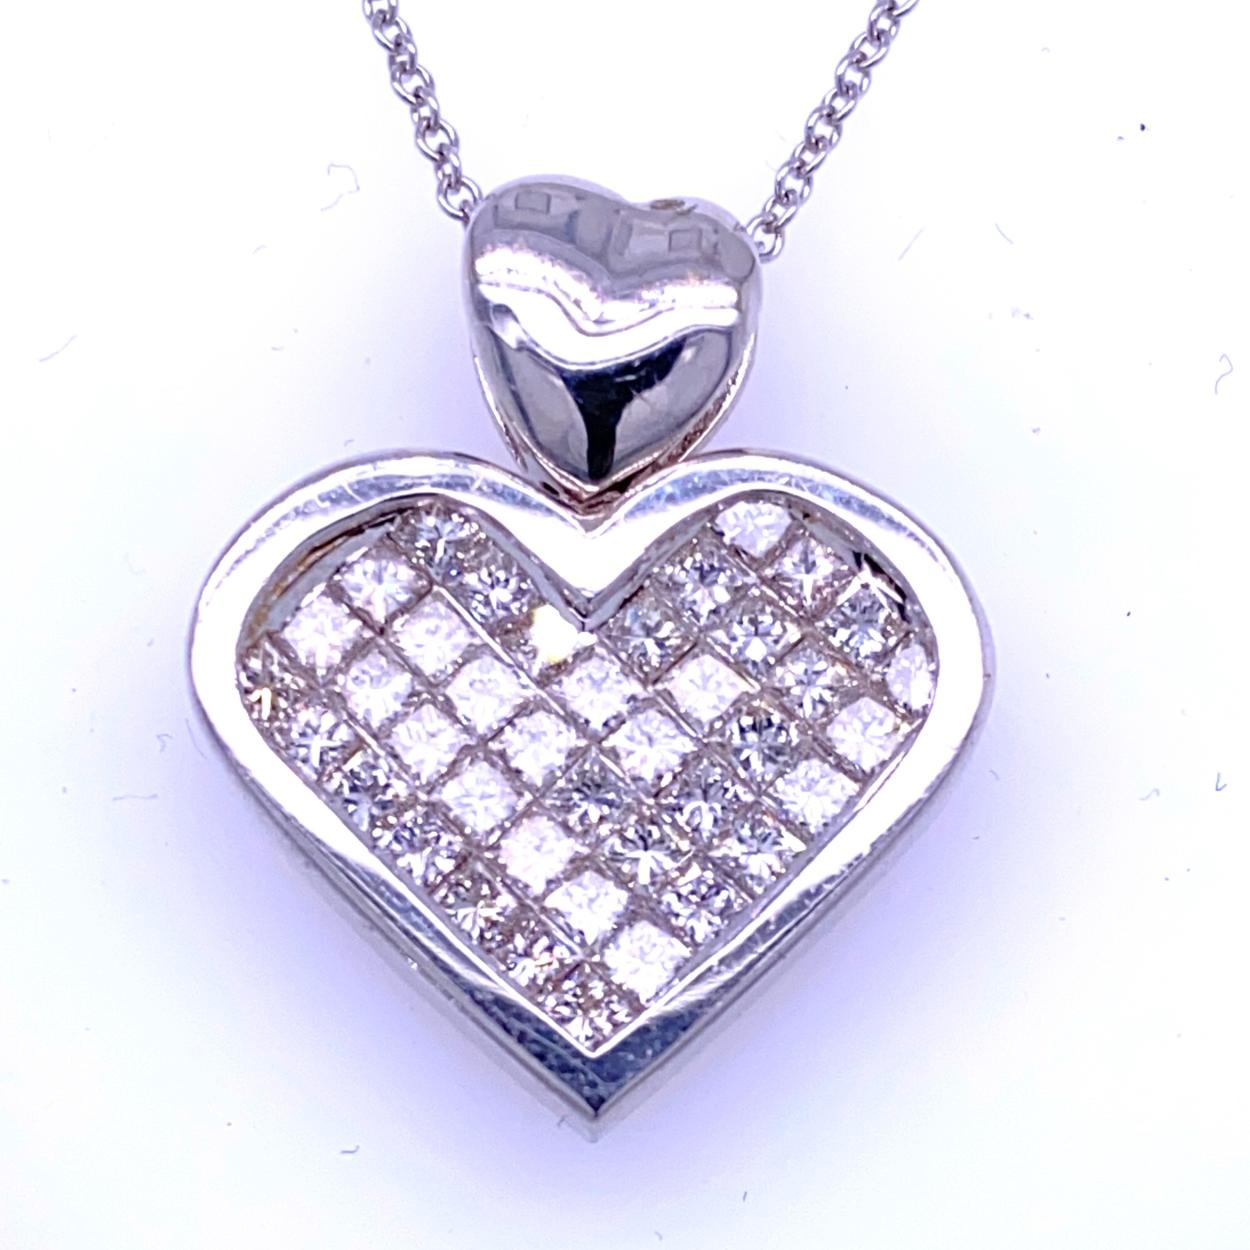 18K Gold Heart shaped Pendant with 40 Invisible Set Princess Cut Diamonds   with total weight of 1.96 Ct. 
Total Diamond Weight: 1.96 Ct
Total Necklace Weight: 8.9 gr
Pendant Size 21x25 mm (4.5 mm depth)
Chain is not included